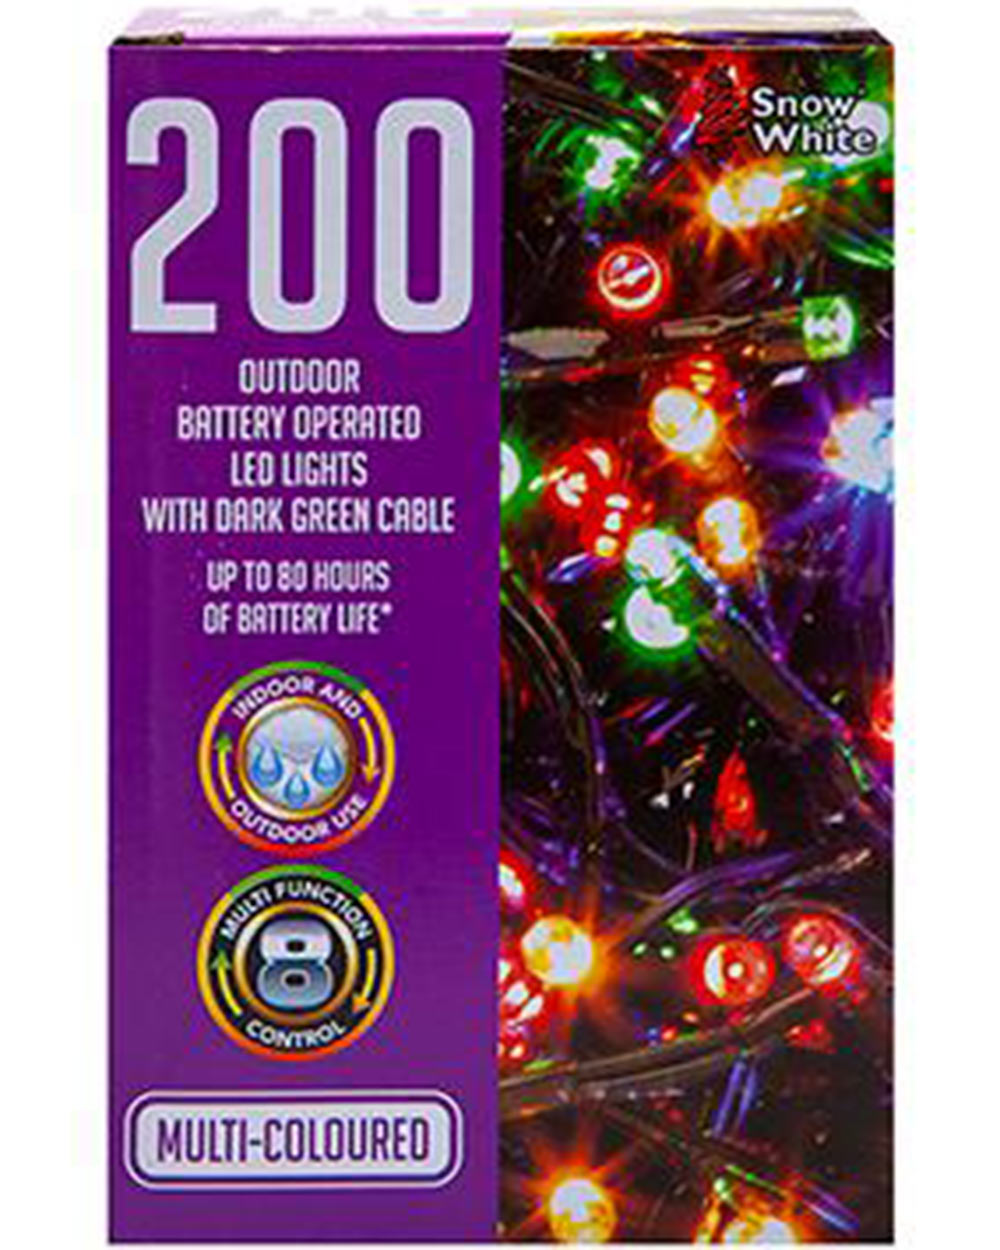 These Christmas LED lights are suitable to use indoor or outdoor use. The perfect lighting for decorating your home. These lights have 8 different settings and a timer control. The lights are battery operated so they can be set up anywhere as there is no need for a plug socket. These battery operated LED lights have up to 80 hours battery life. The lights require 4 x AA batteries (batteries not included). Each bulb is spaced 10 mm apart and has a 30 cm lead wire with a dark green cable.